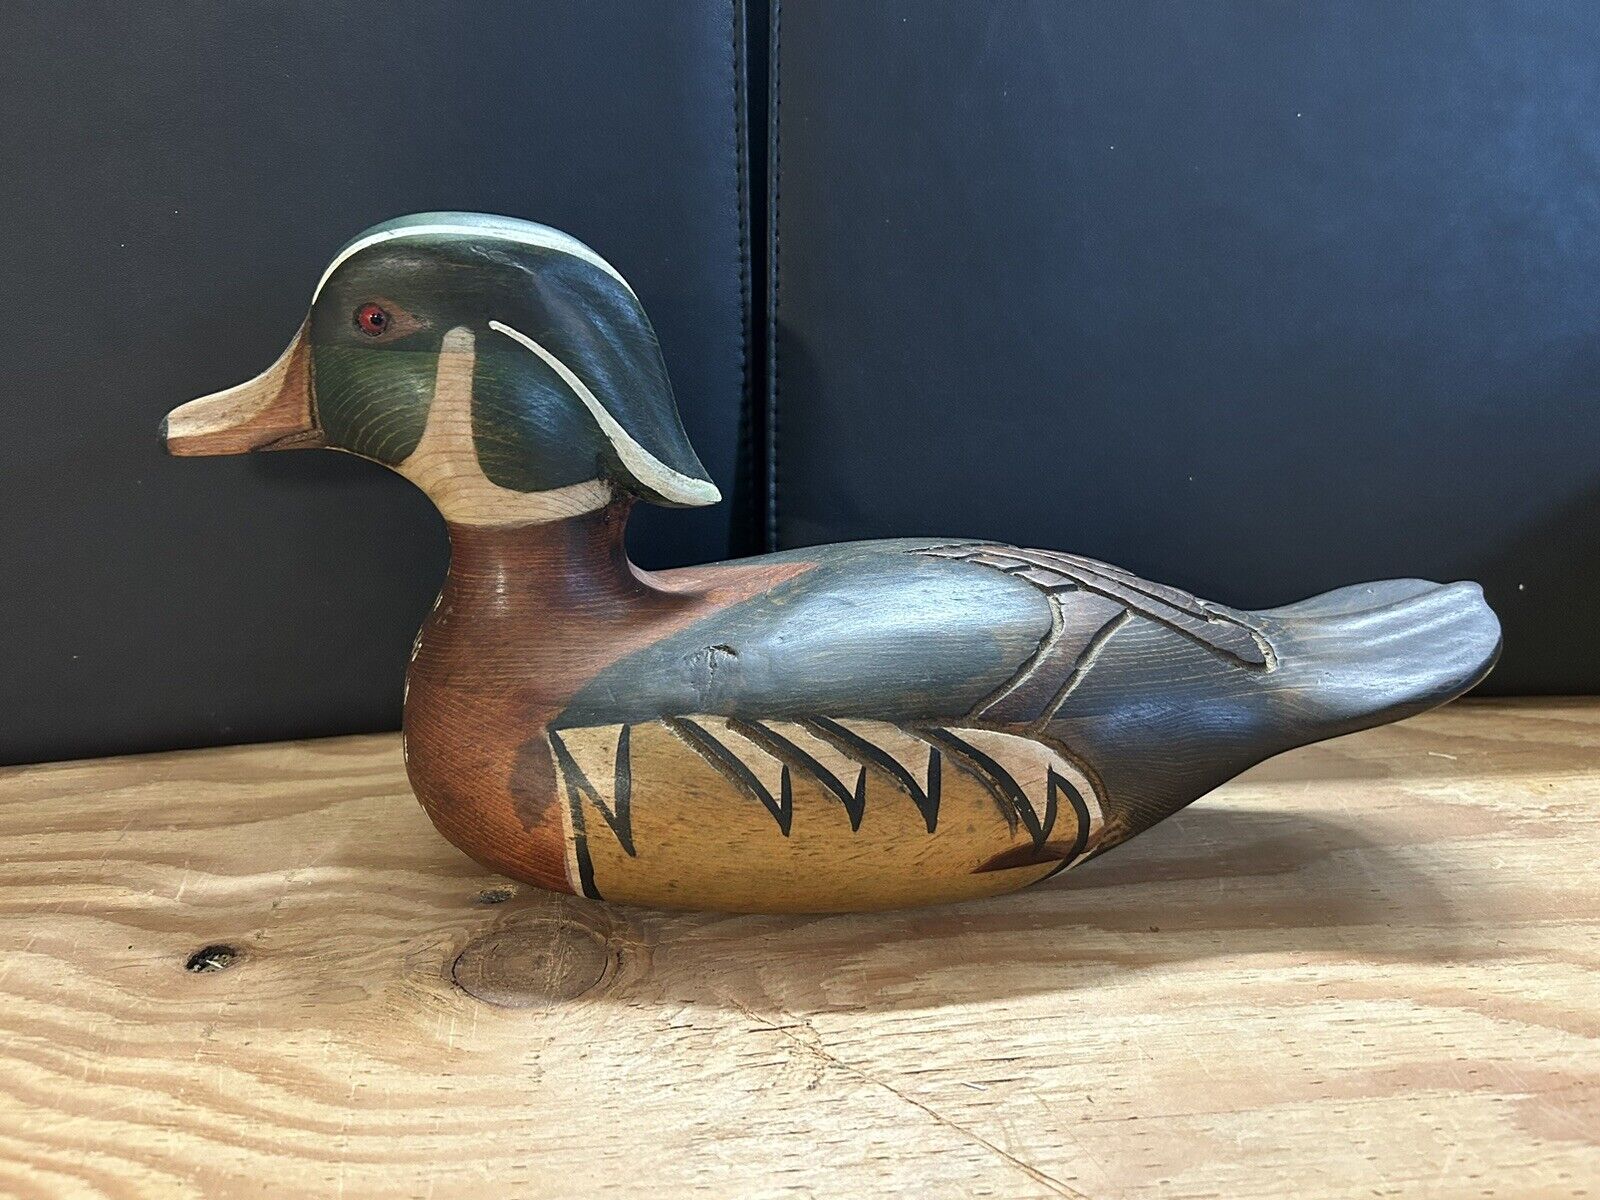 Rare Tom Taber Carved Wood Duck Decoy